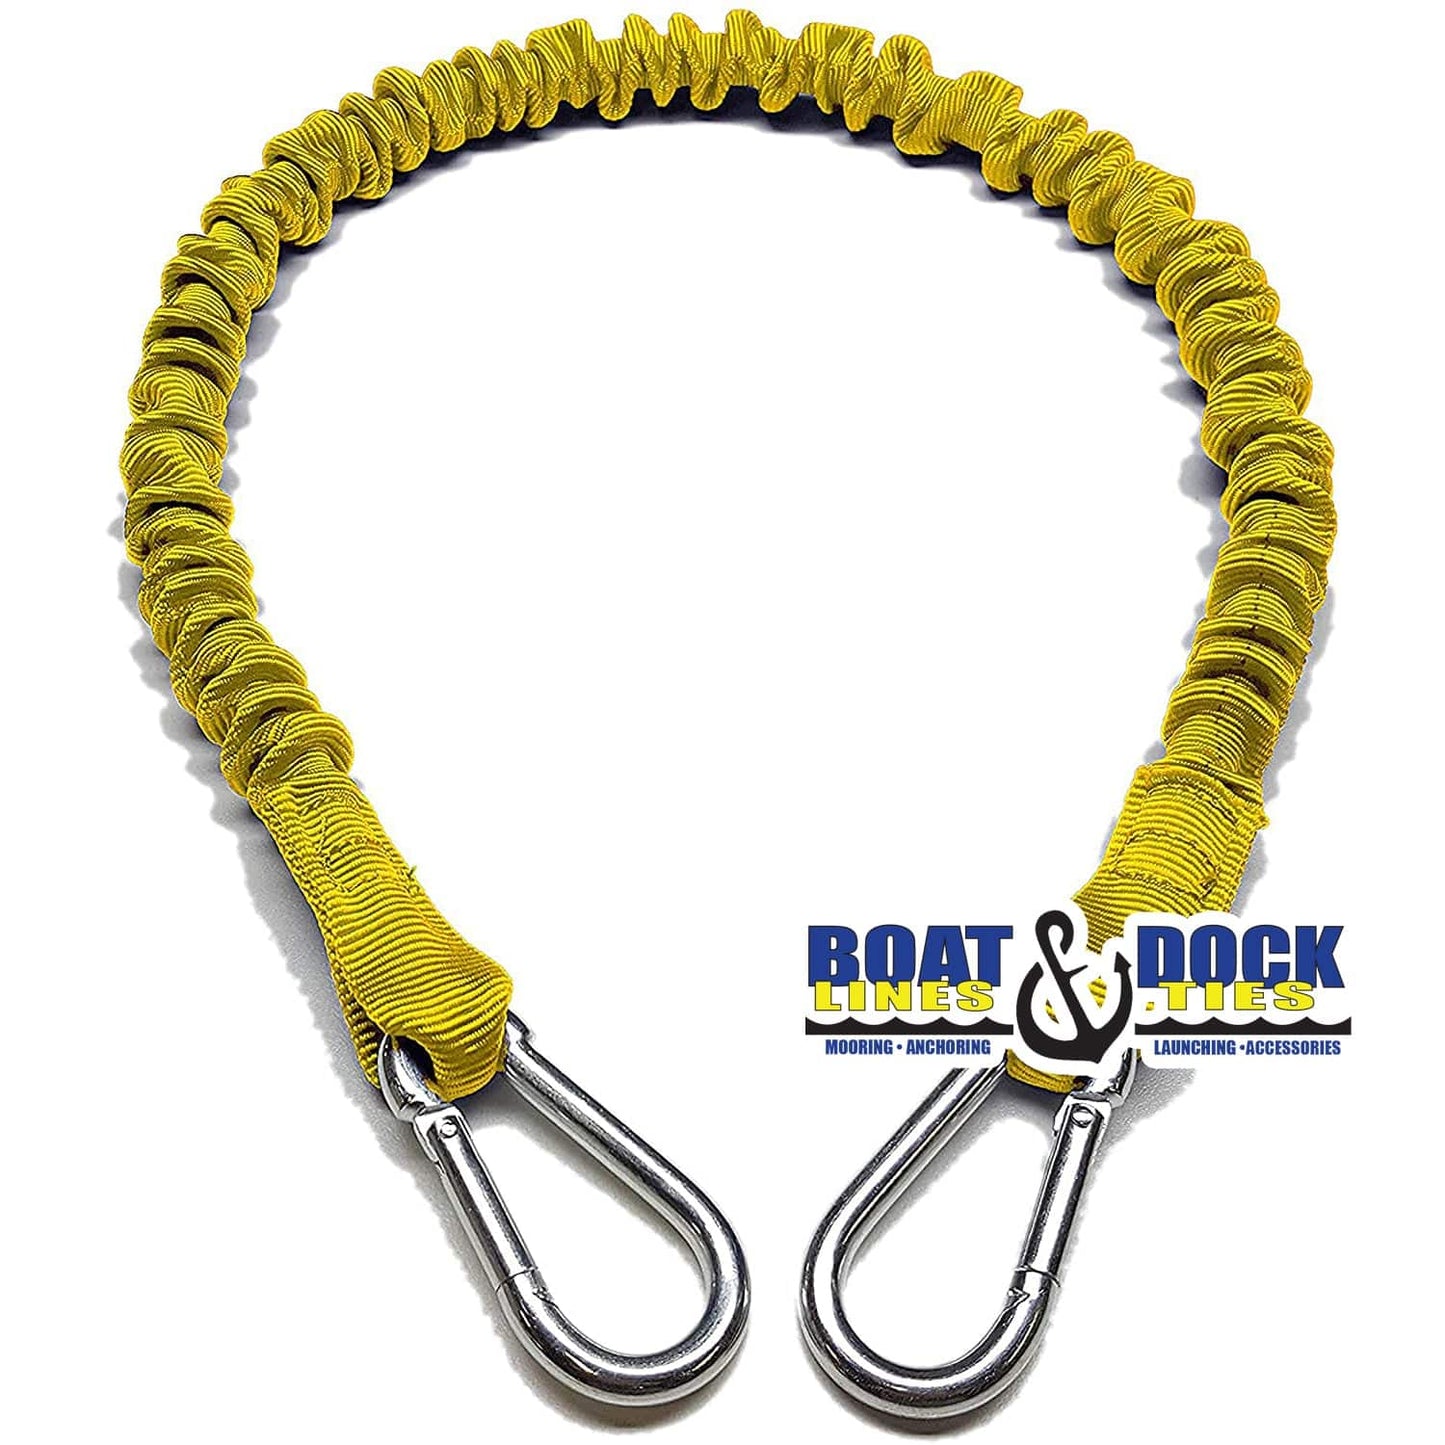 Boat Dock Tie Bungee Cords, 2 Hooked Ends, UV Protected Bungee Cords - Set of 2 - Made in USA - Boat Lines & Dock Ties Boat Lines & Dock Ties 24" / Yellow